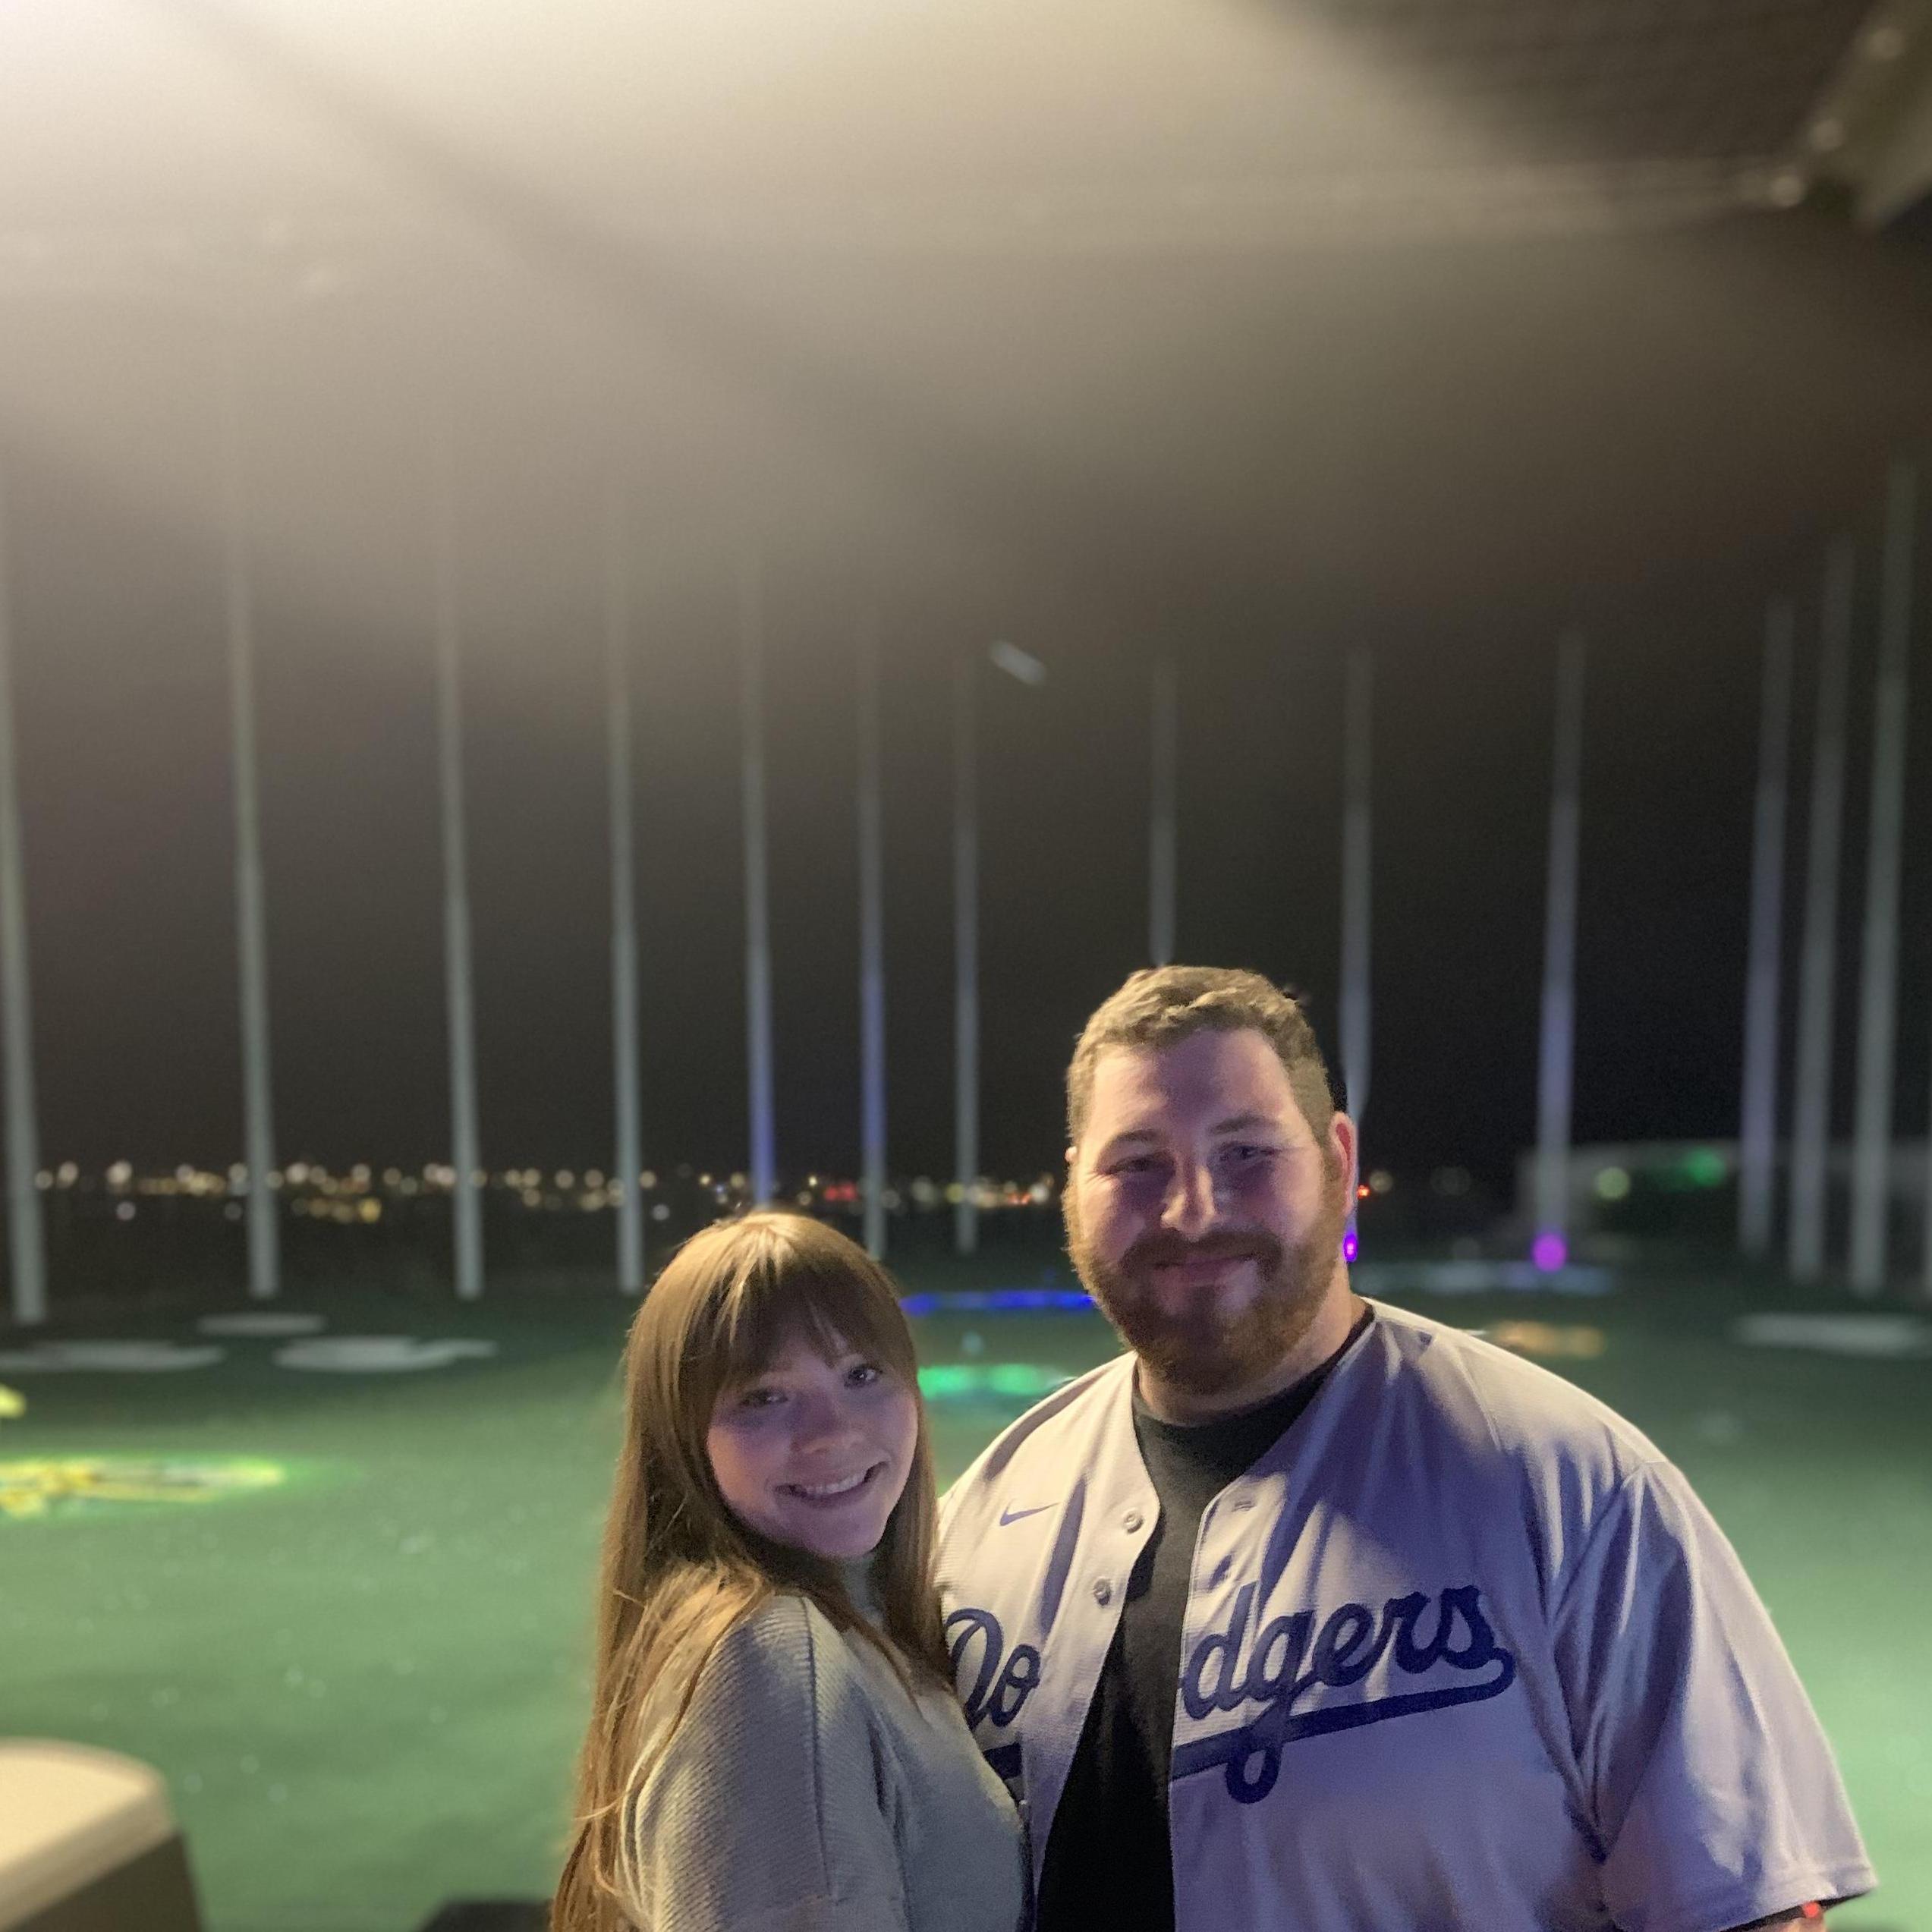 December 28, 2020 - Riley's 23rd Bday in Tucson at Topgolf